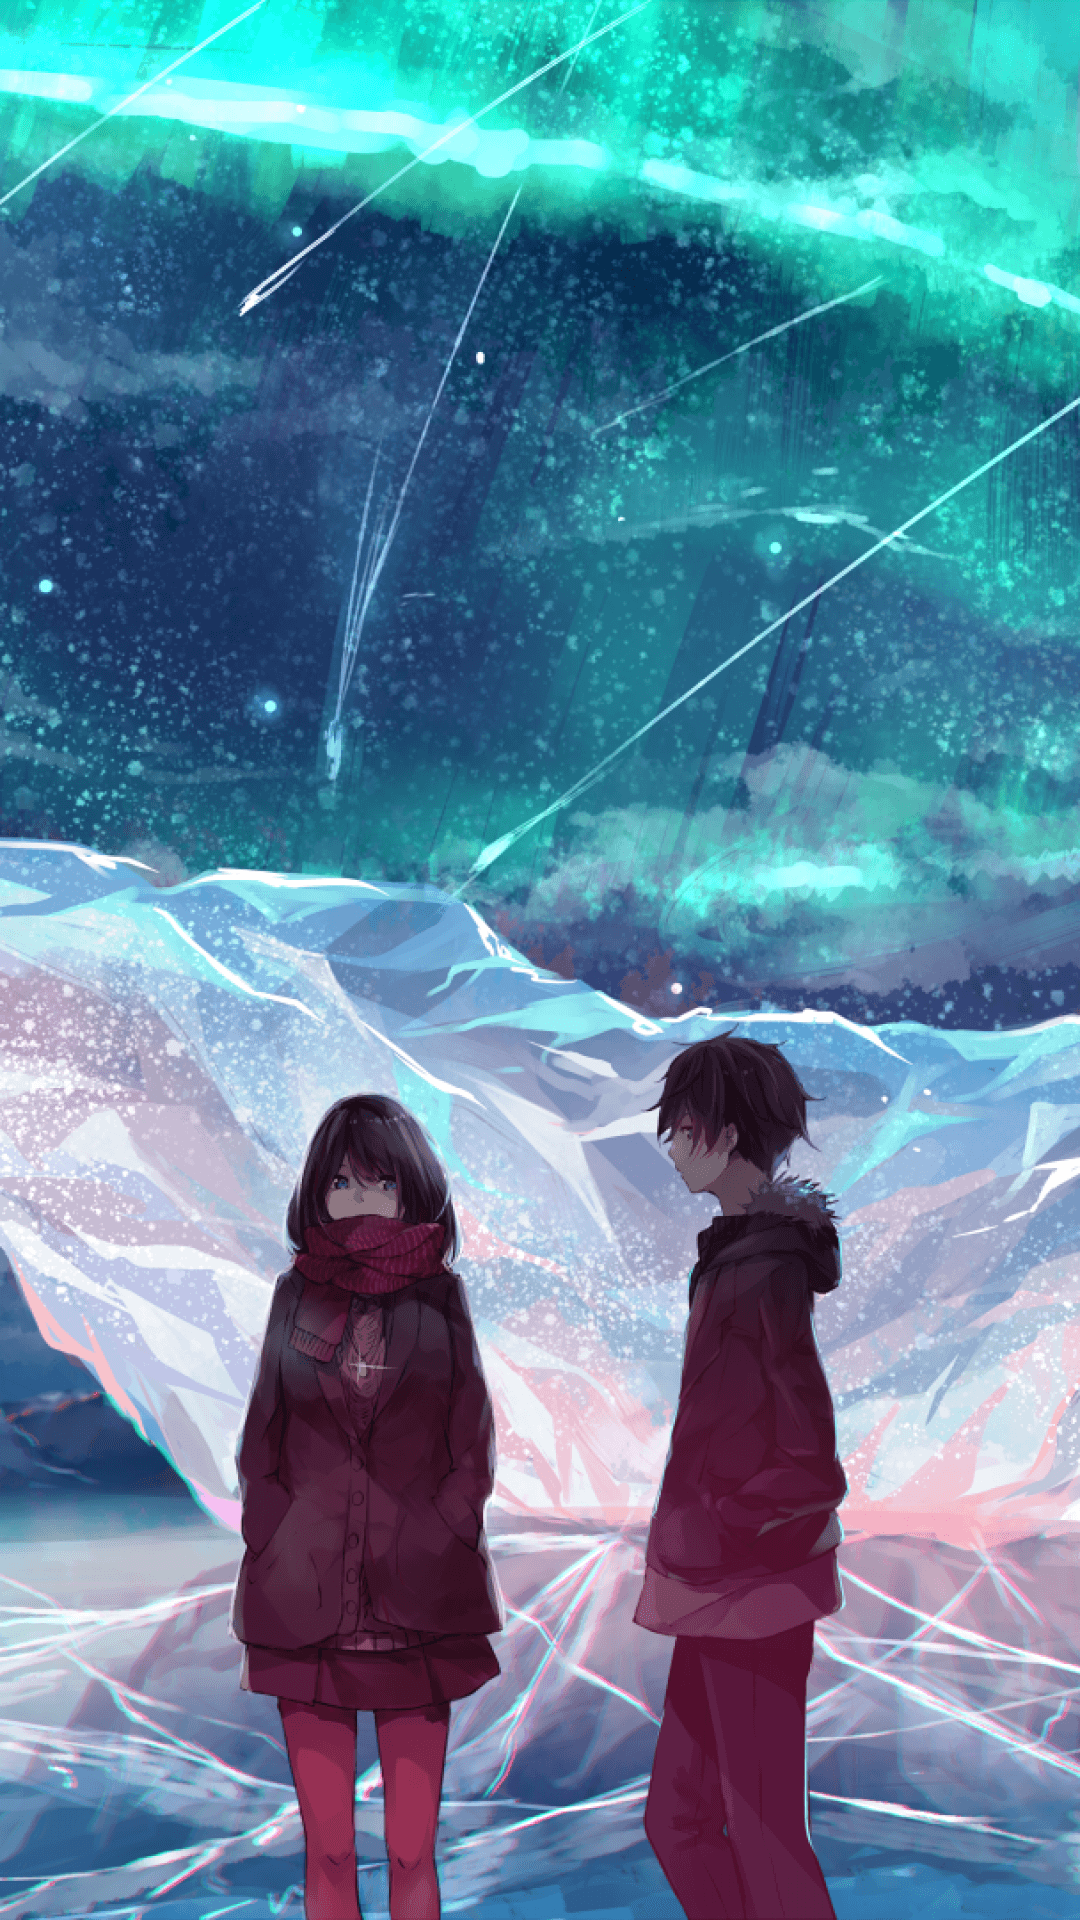 Anime Couple Winter Wallpapers - Wallpaper Cave